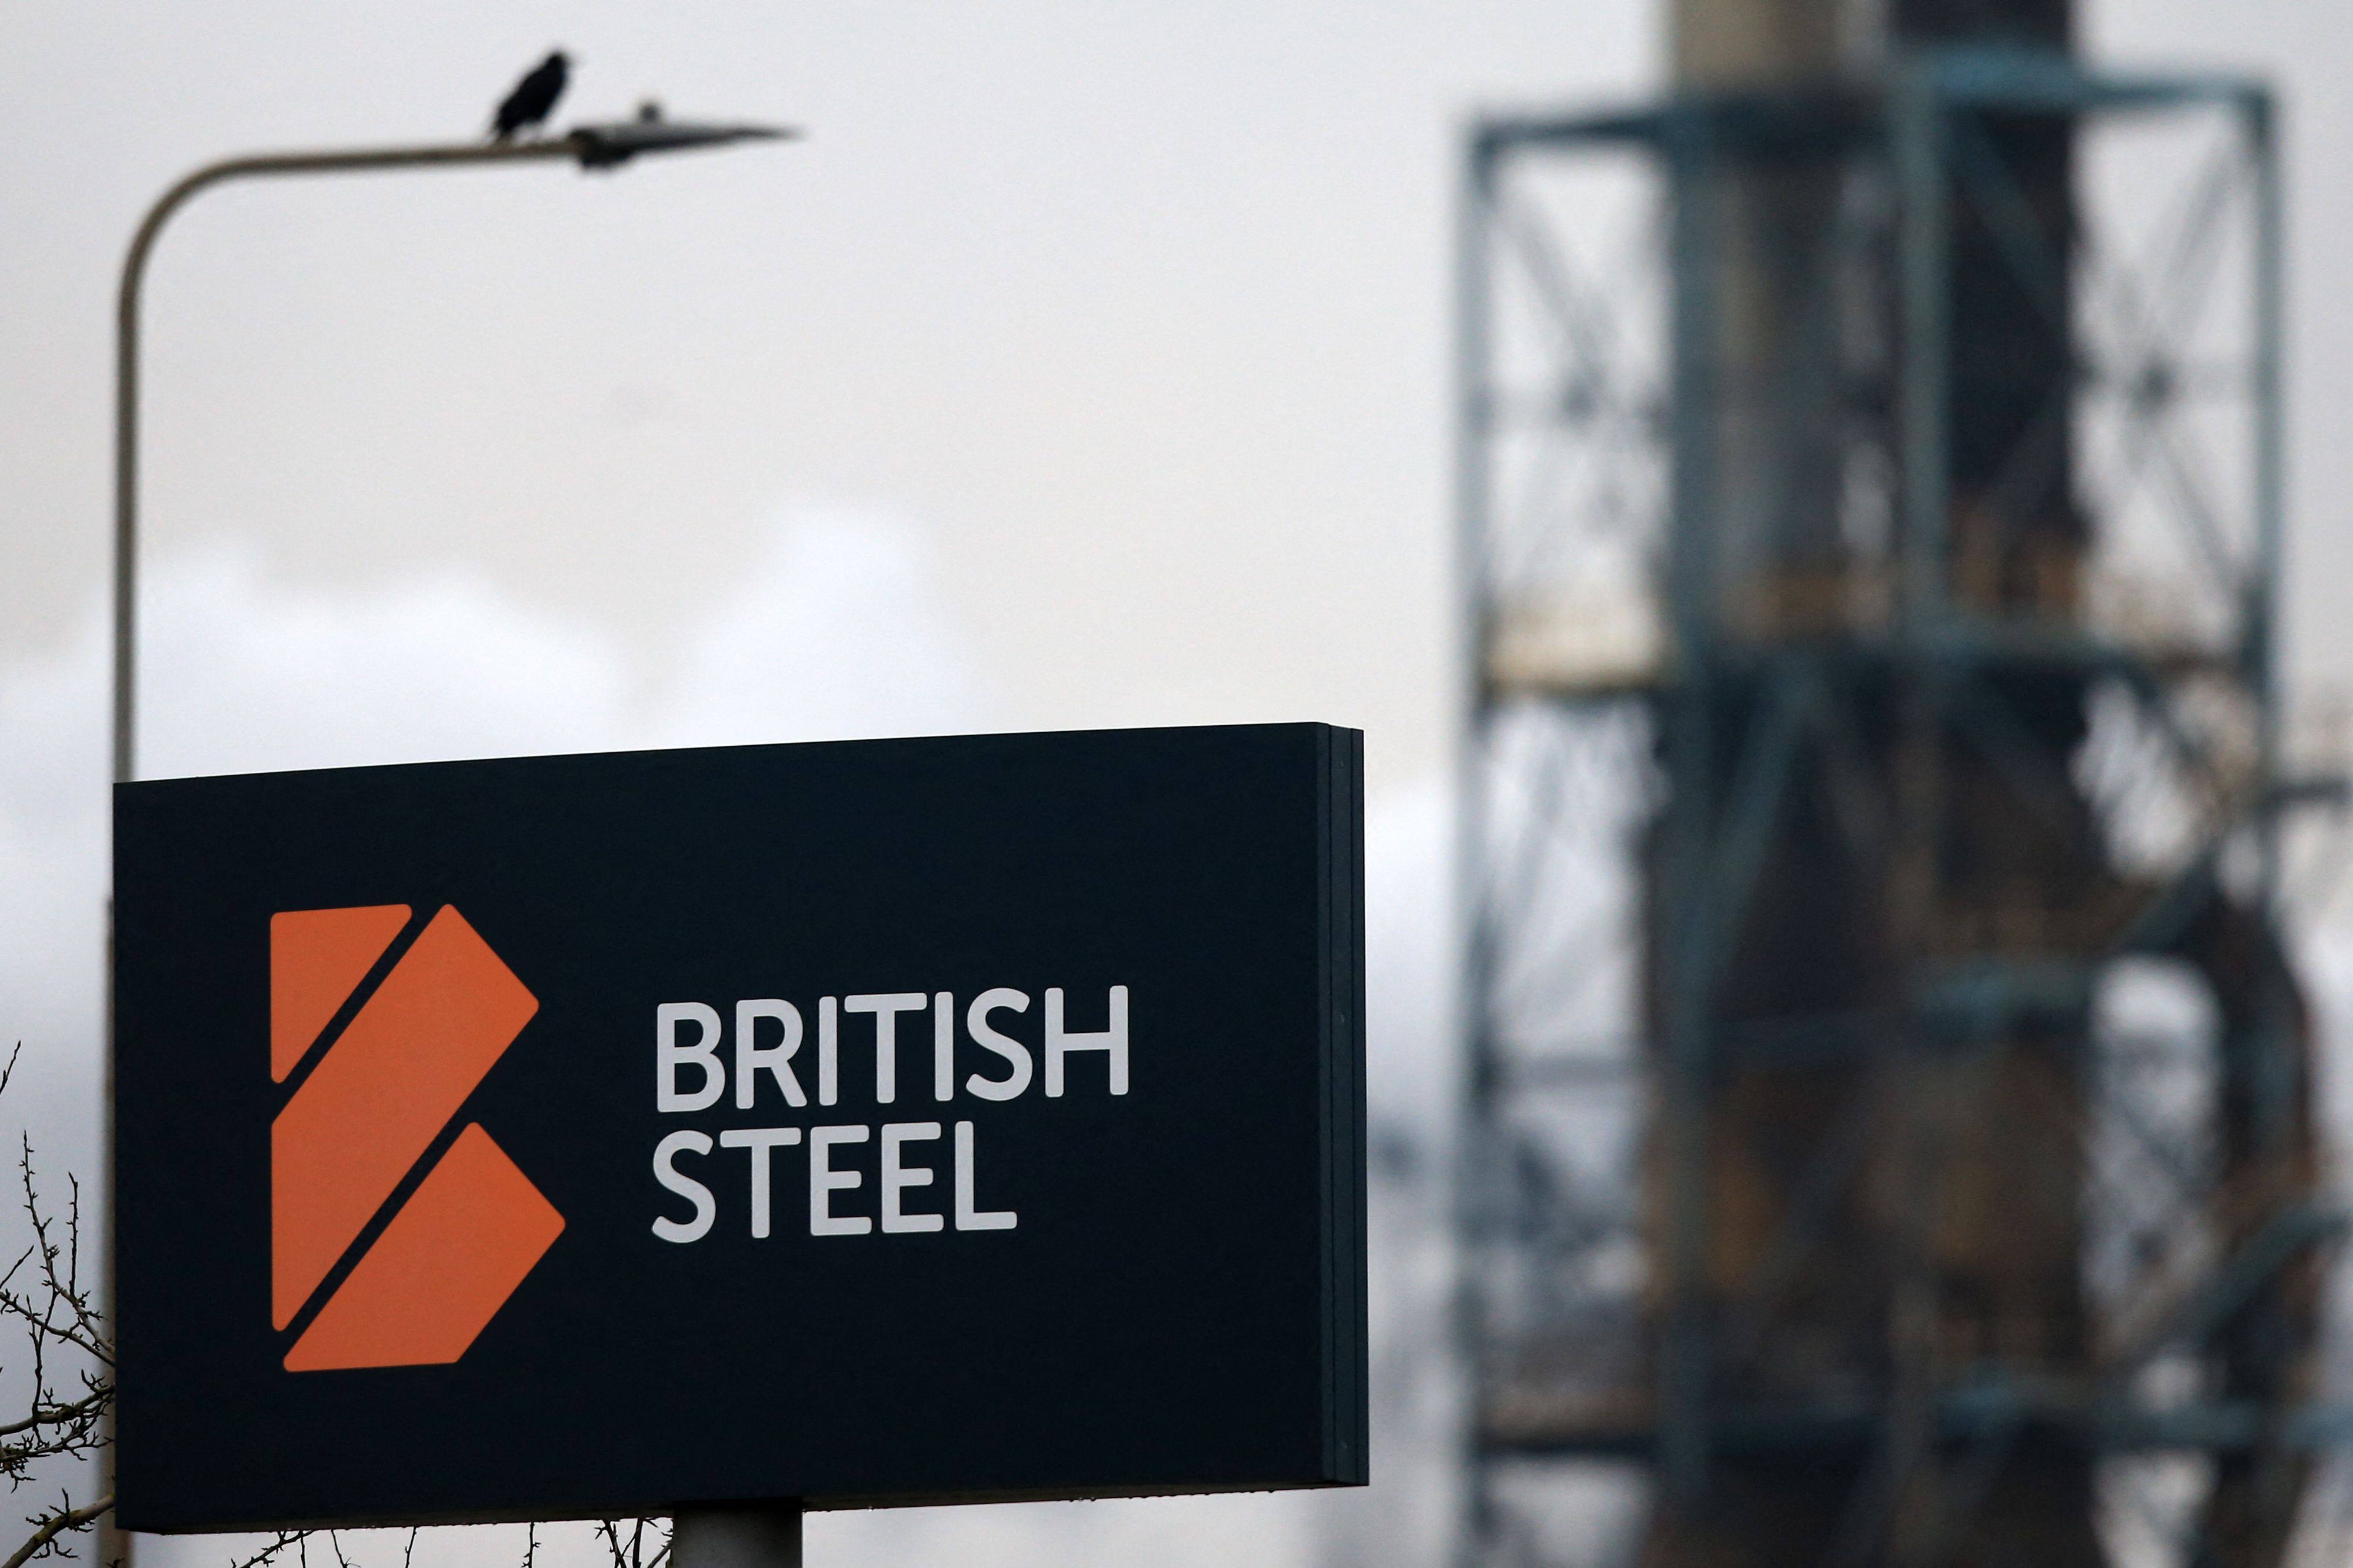 Chinese-owned British Steel is preparing to axe up to 2,000 jobs as part of a cost-cutting programme, according to a newspaper report. Photo: AFP